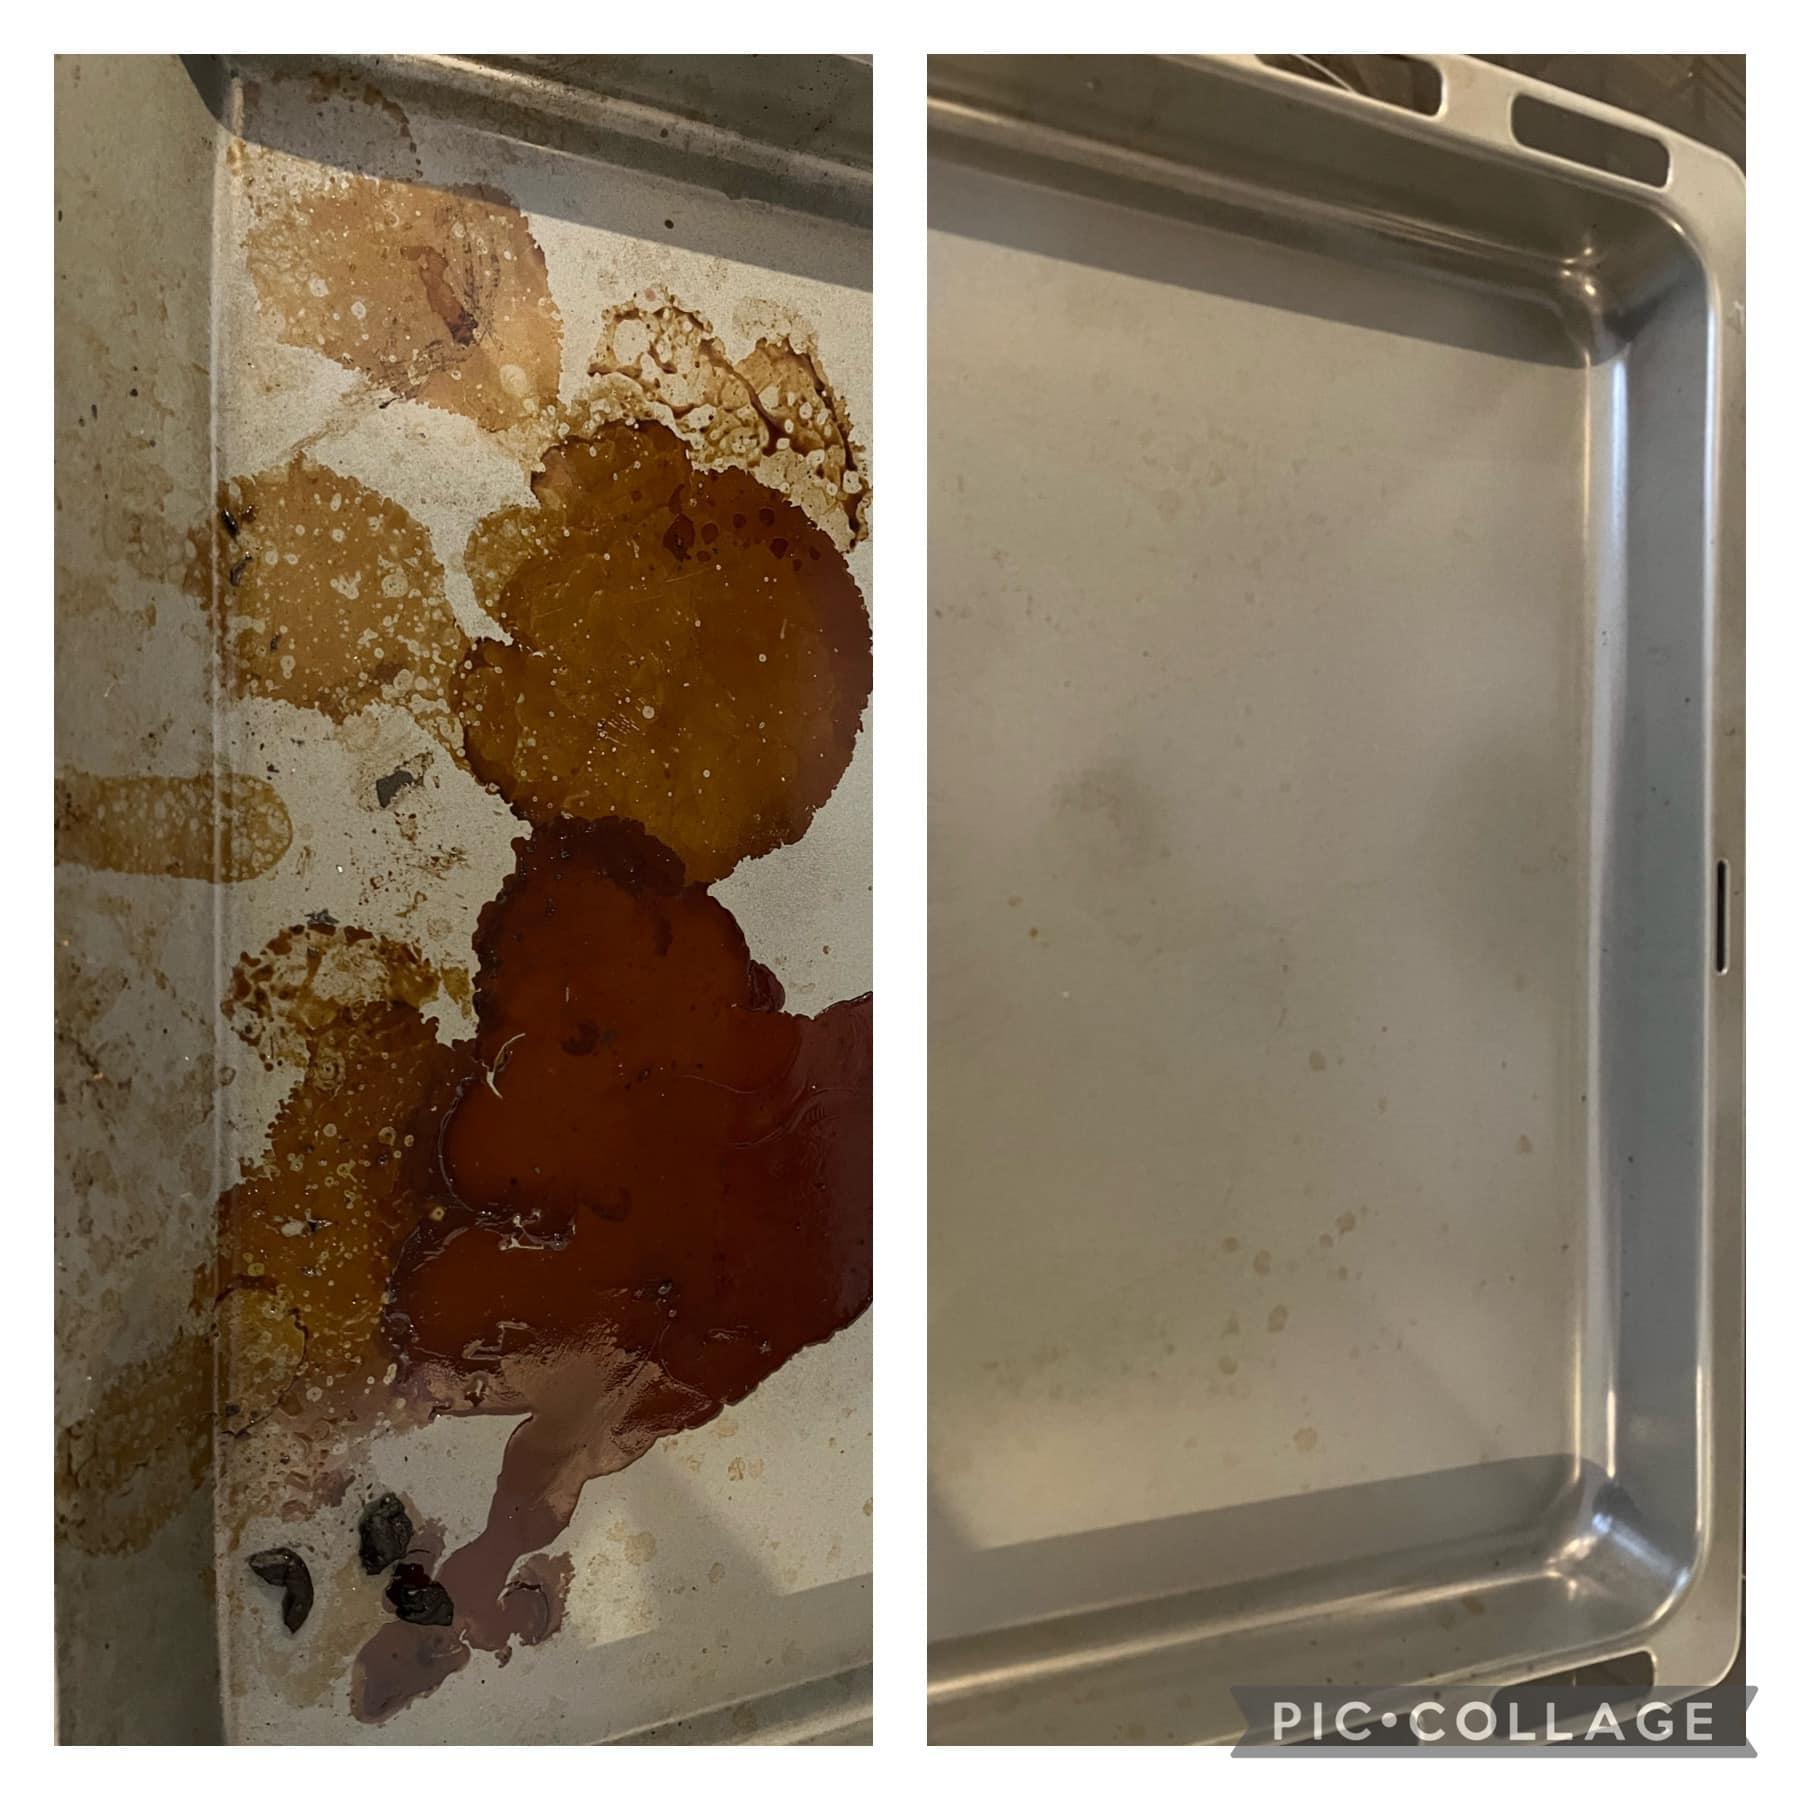 Before and after cleaning the baking tray.